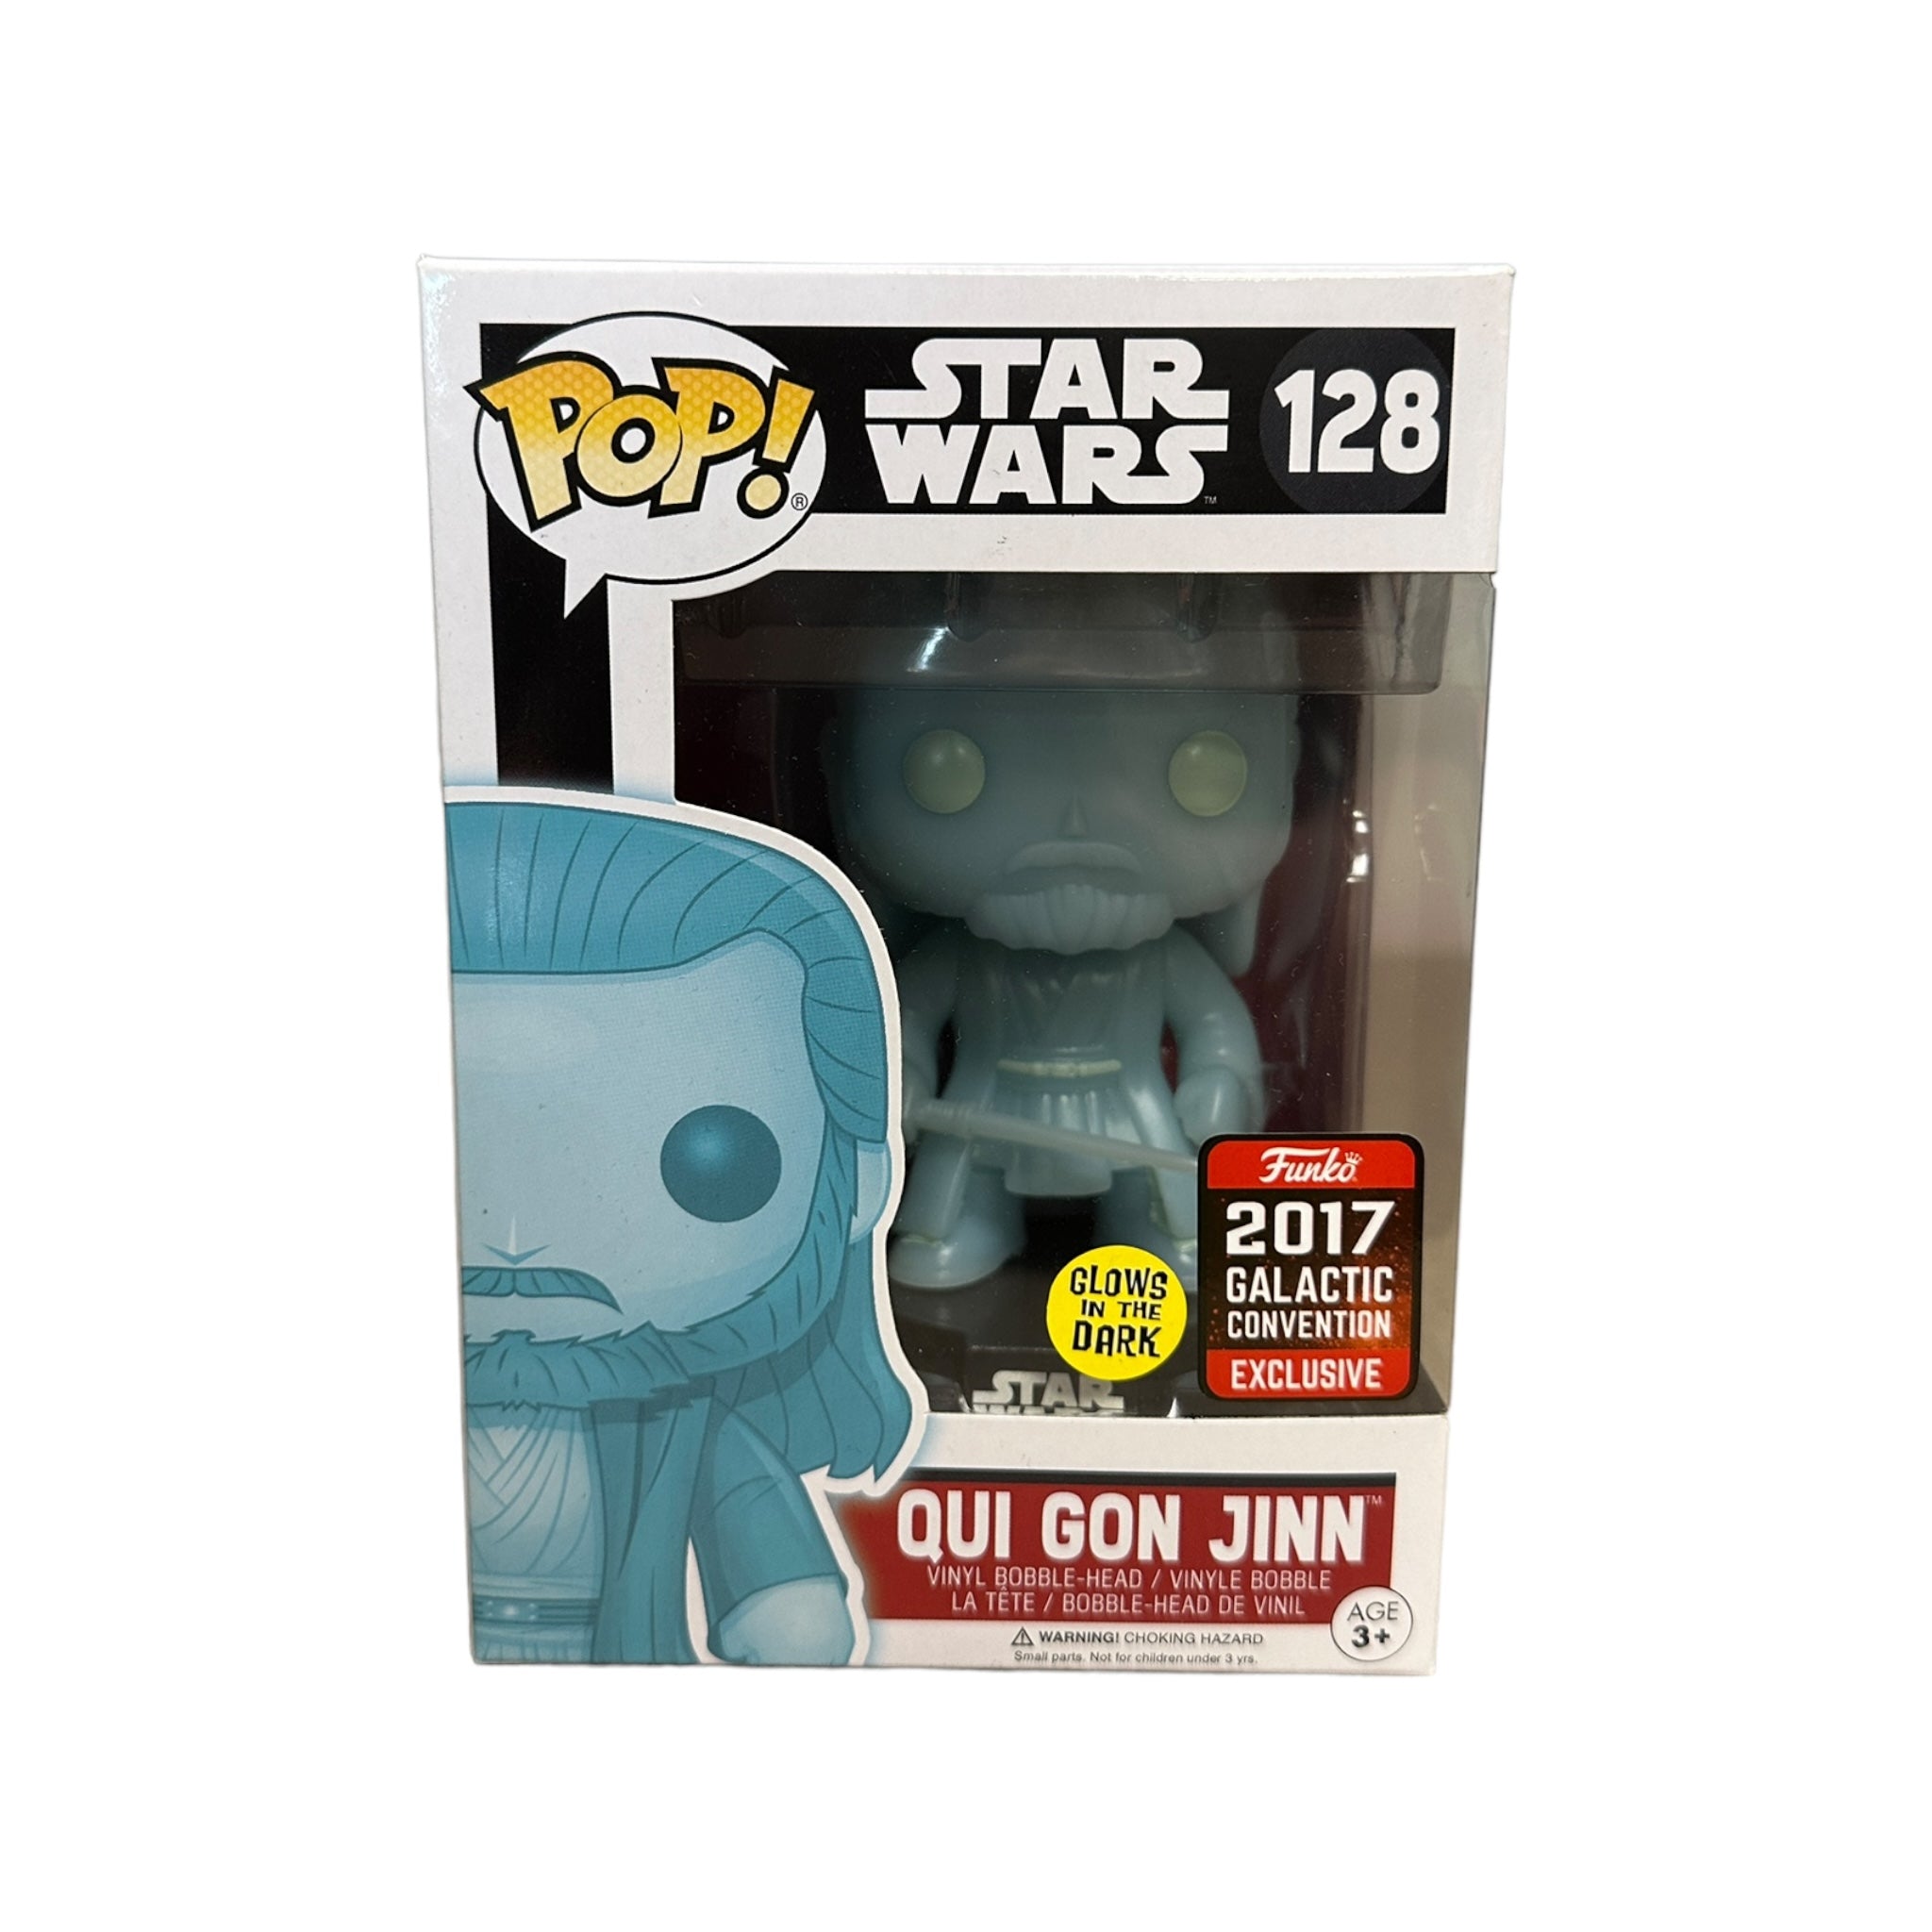 Qui Gon Jinn #128 (Holographic Glows in the Dark) Funko Pop! - Star Wars - Galactic Convention 2017 Exclusive - Condition 8.75/10